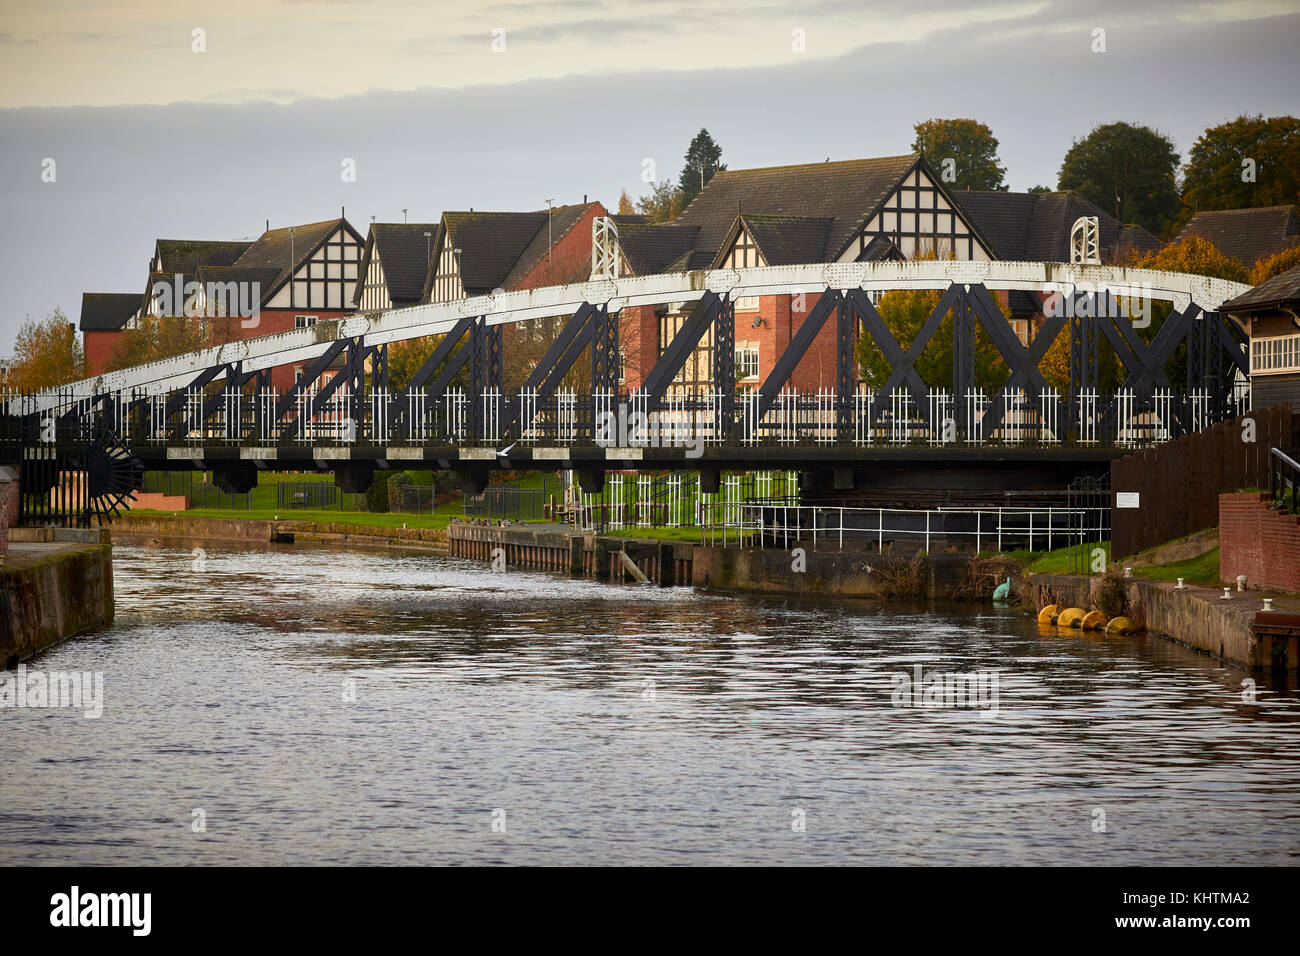 Canal boats floating on the River Weaver with golden autumn trees in the landscape and the Northwhich Town Swing Bridge in the background, Northwich i Stock Photo